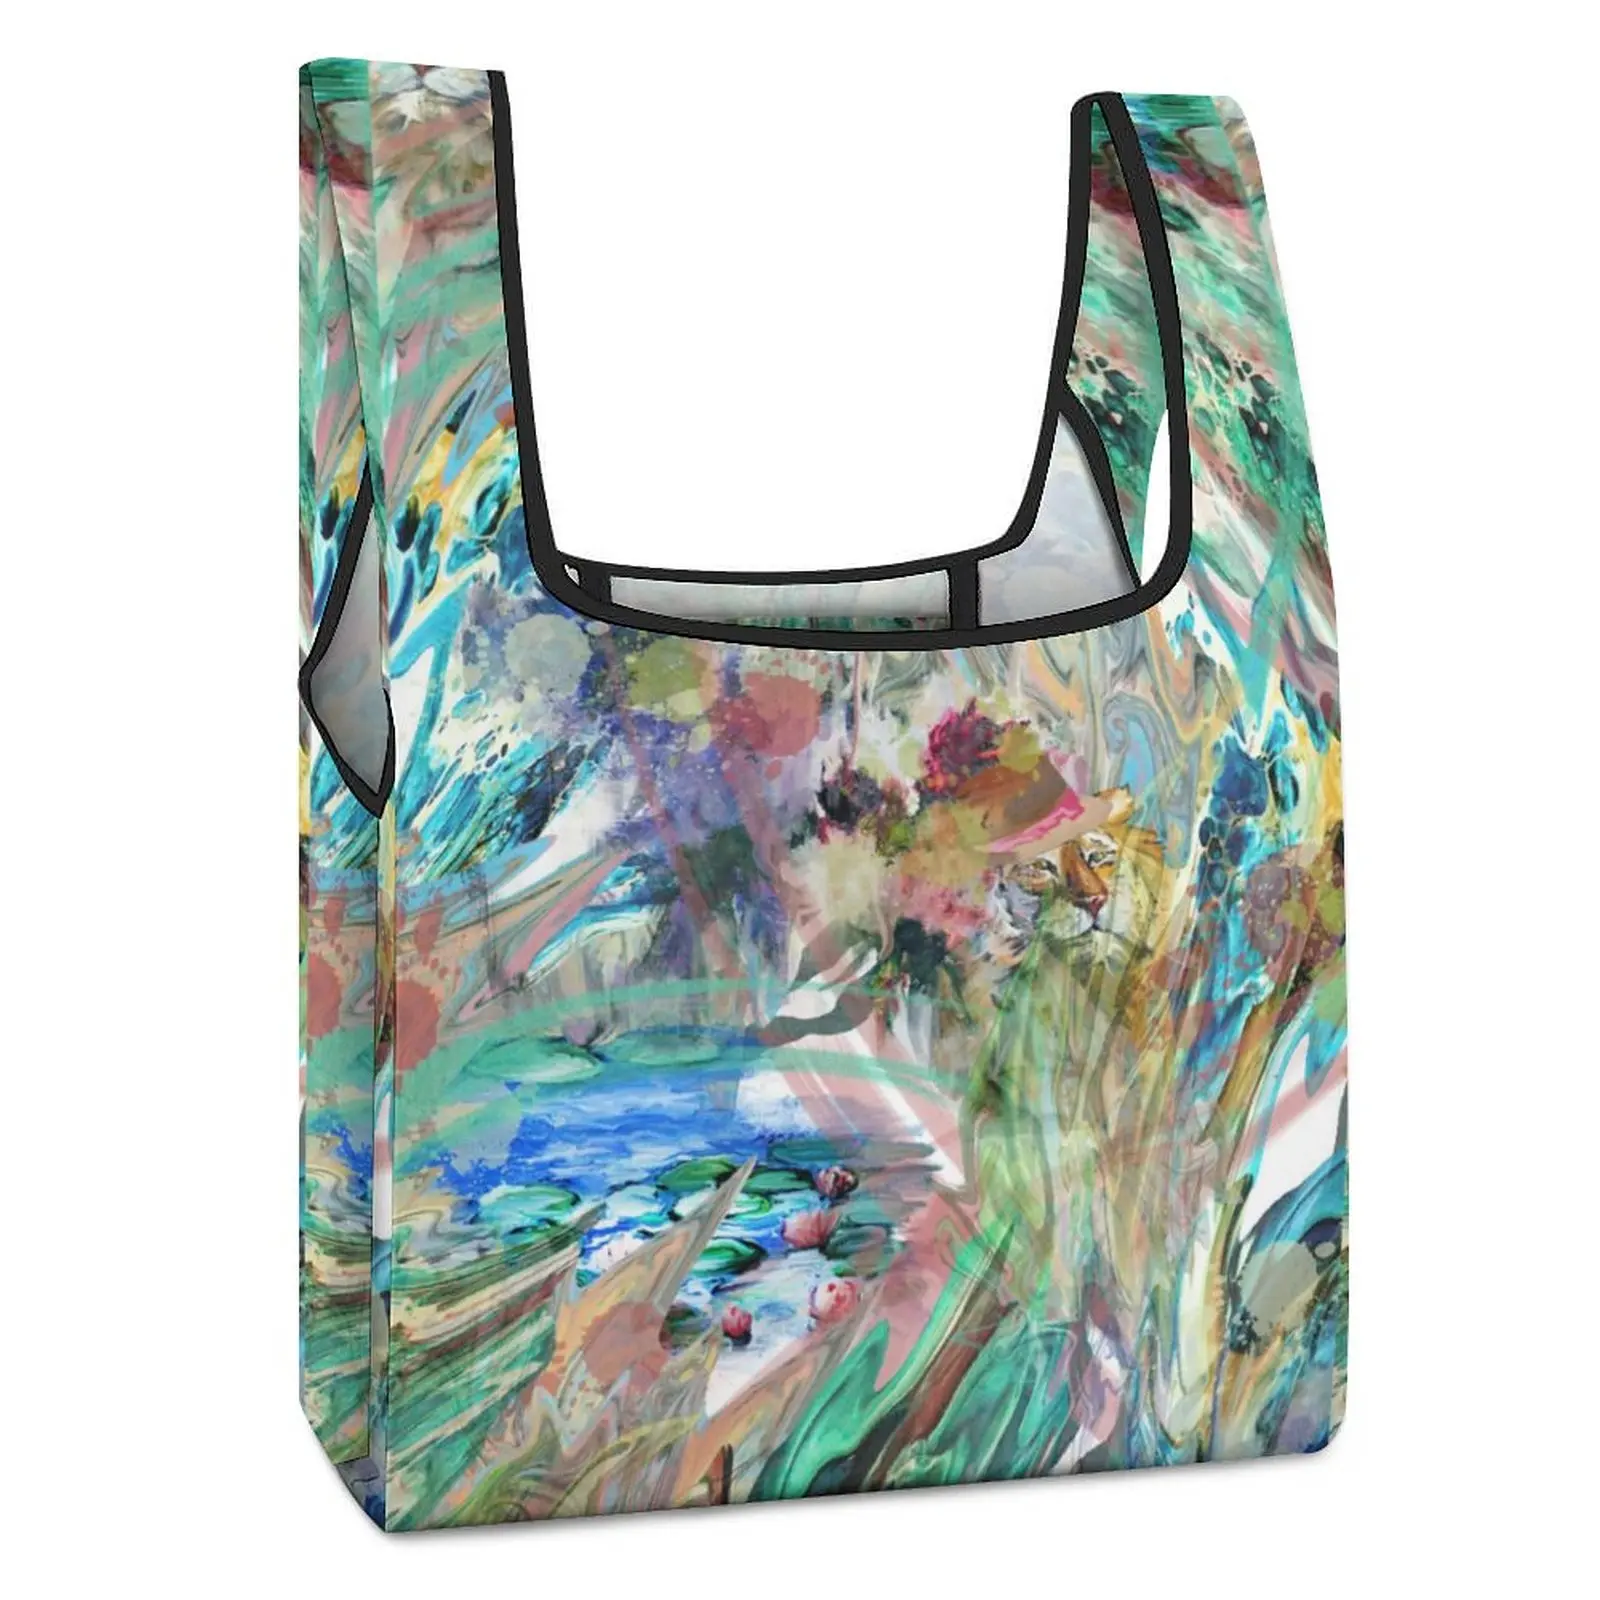 Large Shopping Bag Double Strap Handbag Totebag Colorful Printing Foldable Tote Bag Recycle Floral Pouch Bags Custom Pattern